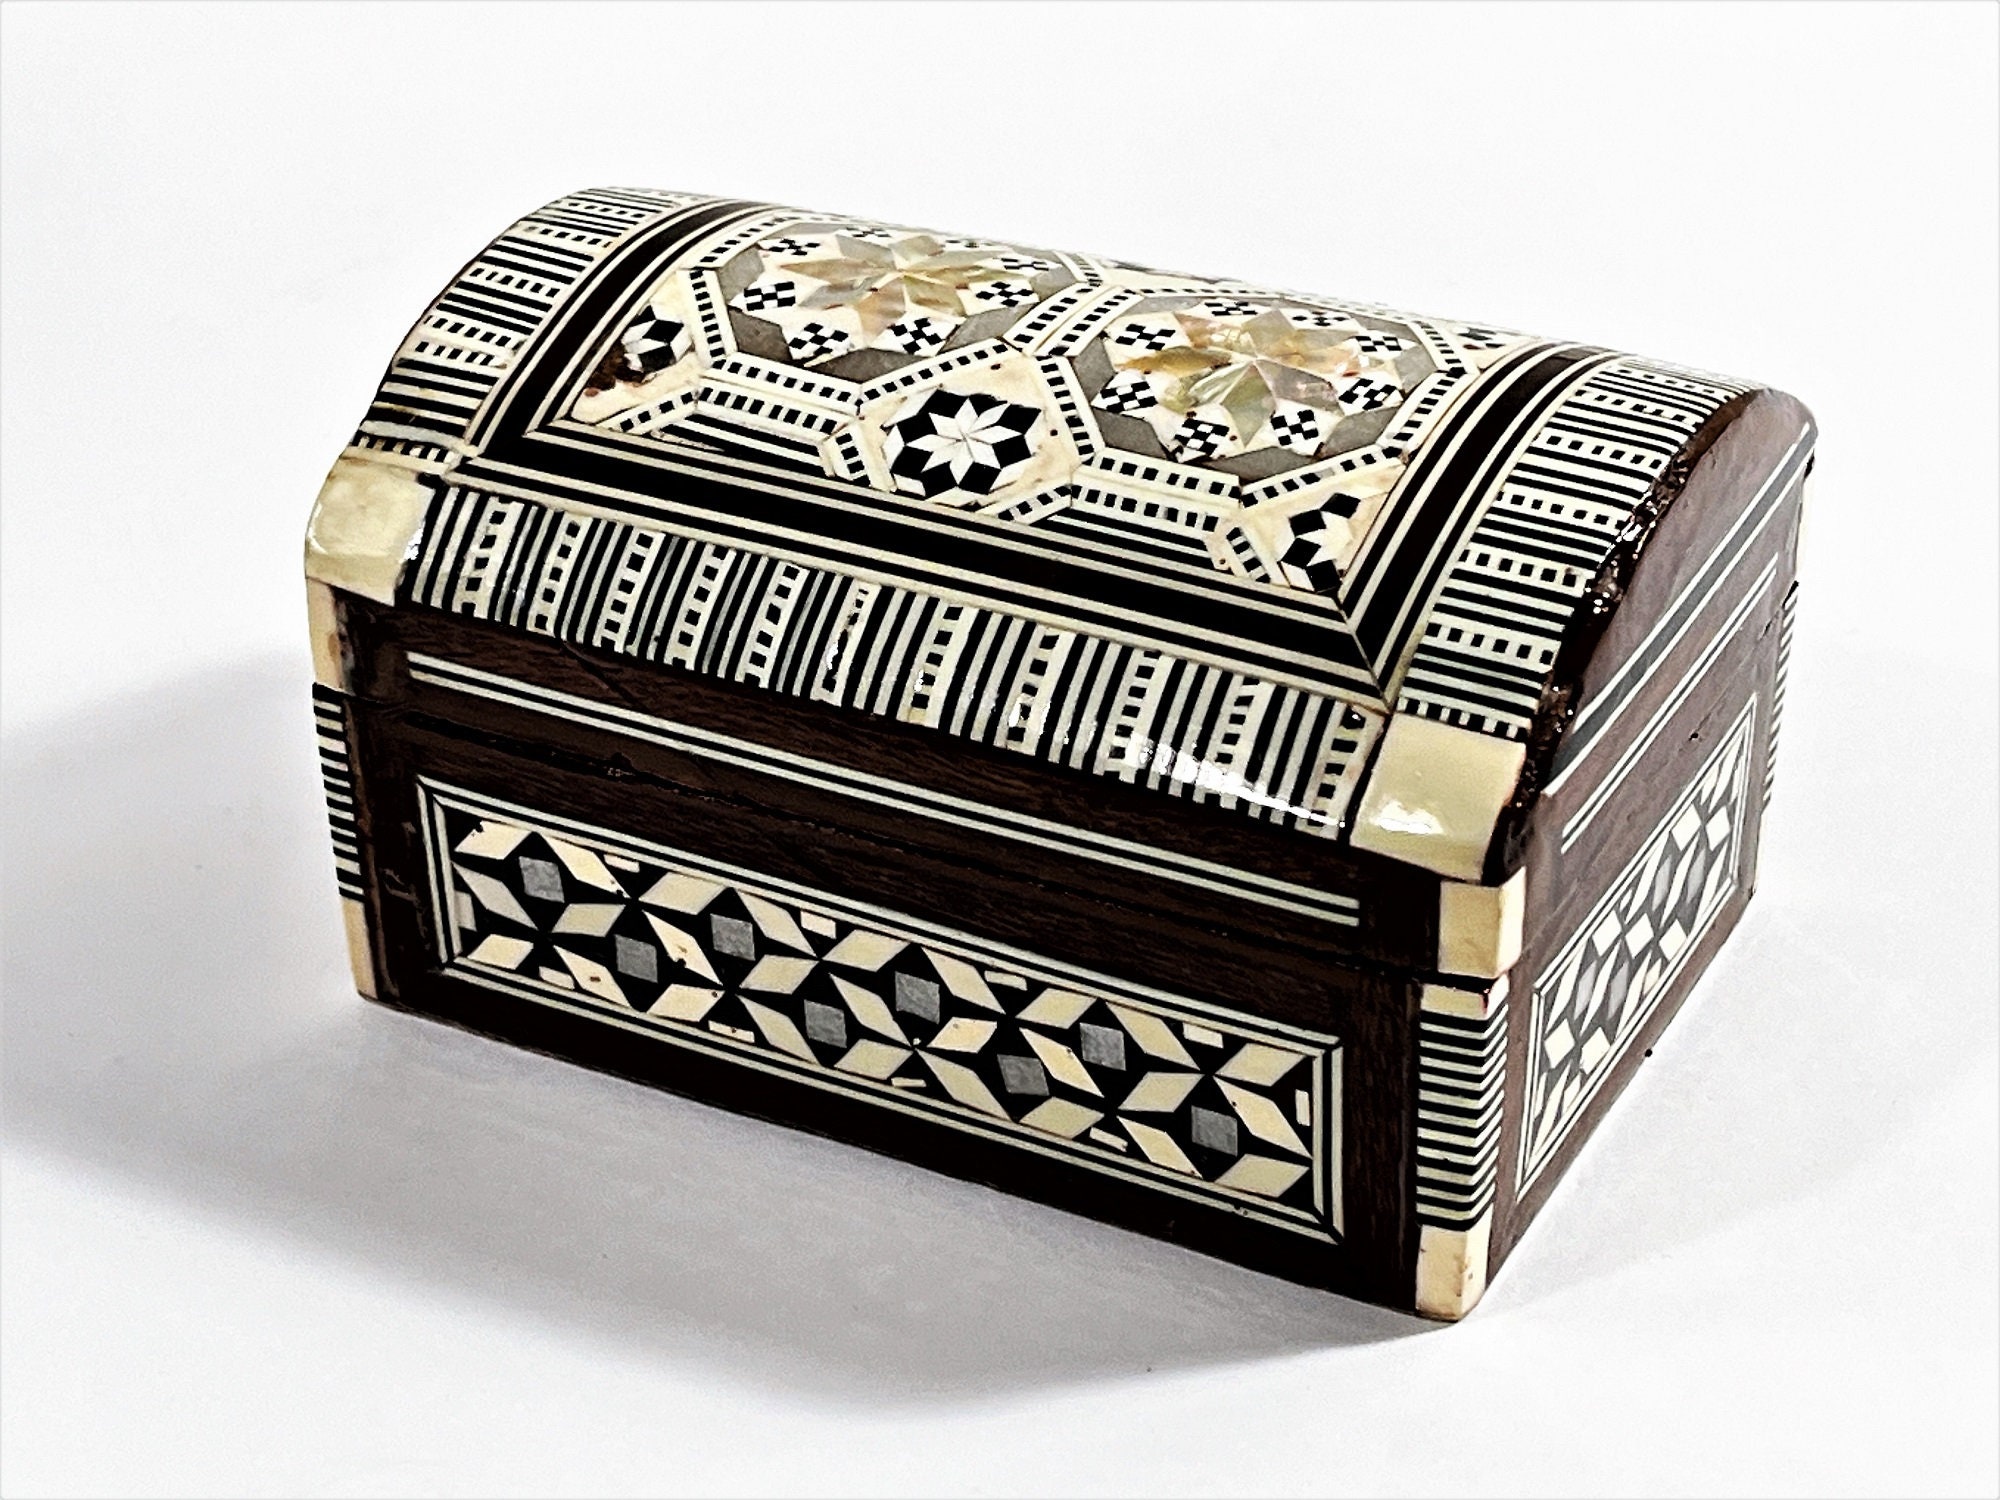 Jewellery box gold and ivory pattern velvet lined